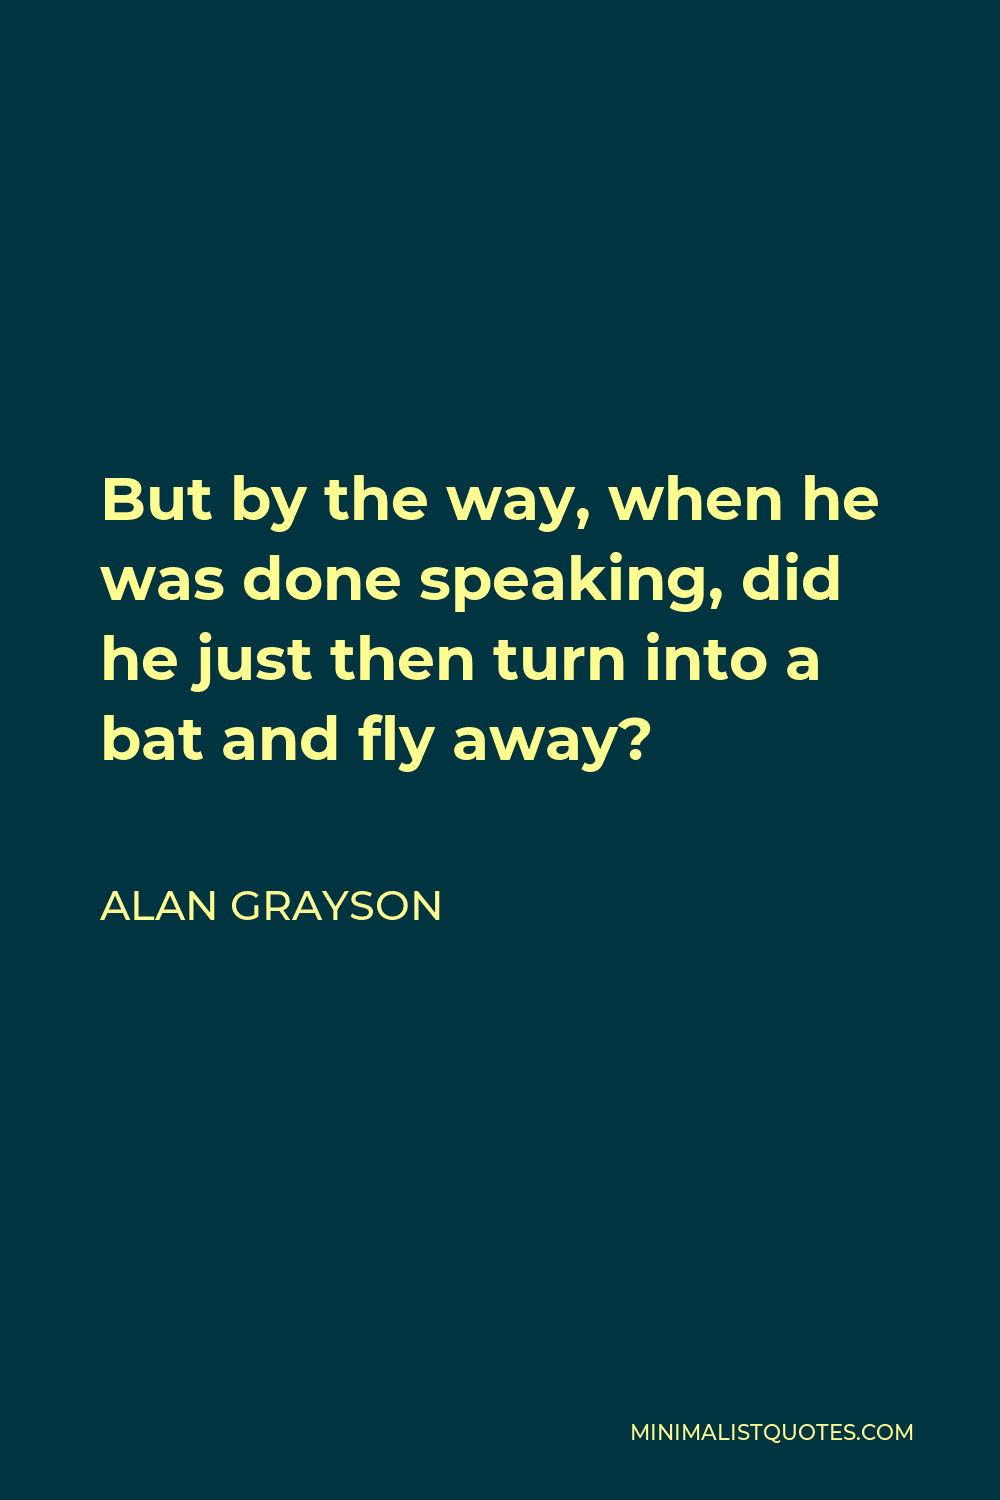 Alan Grayson Quote - But by the way, when he was done speaking, did he just then turn into a bat and fly away?